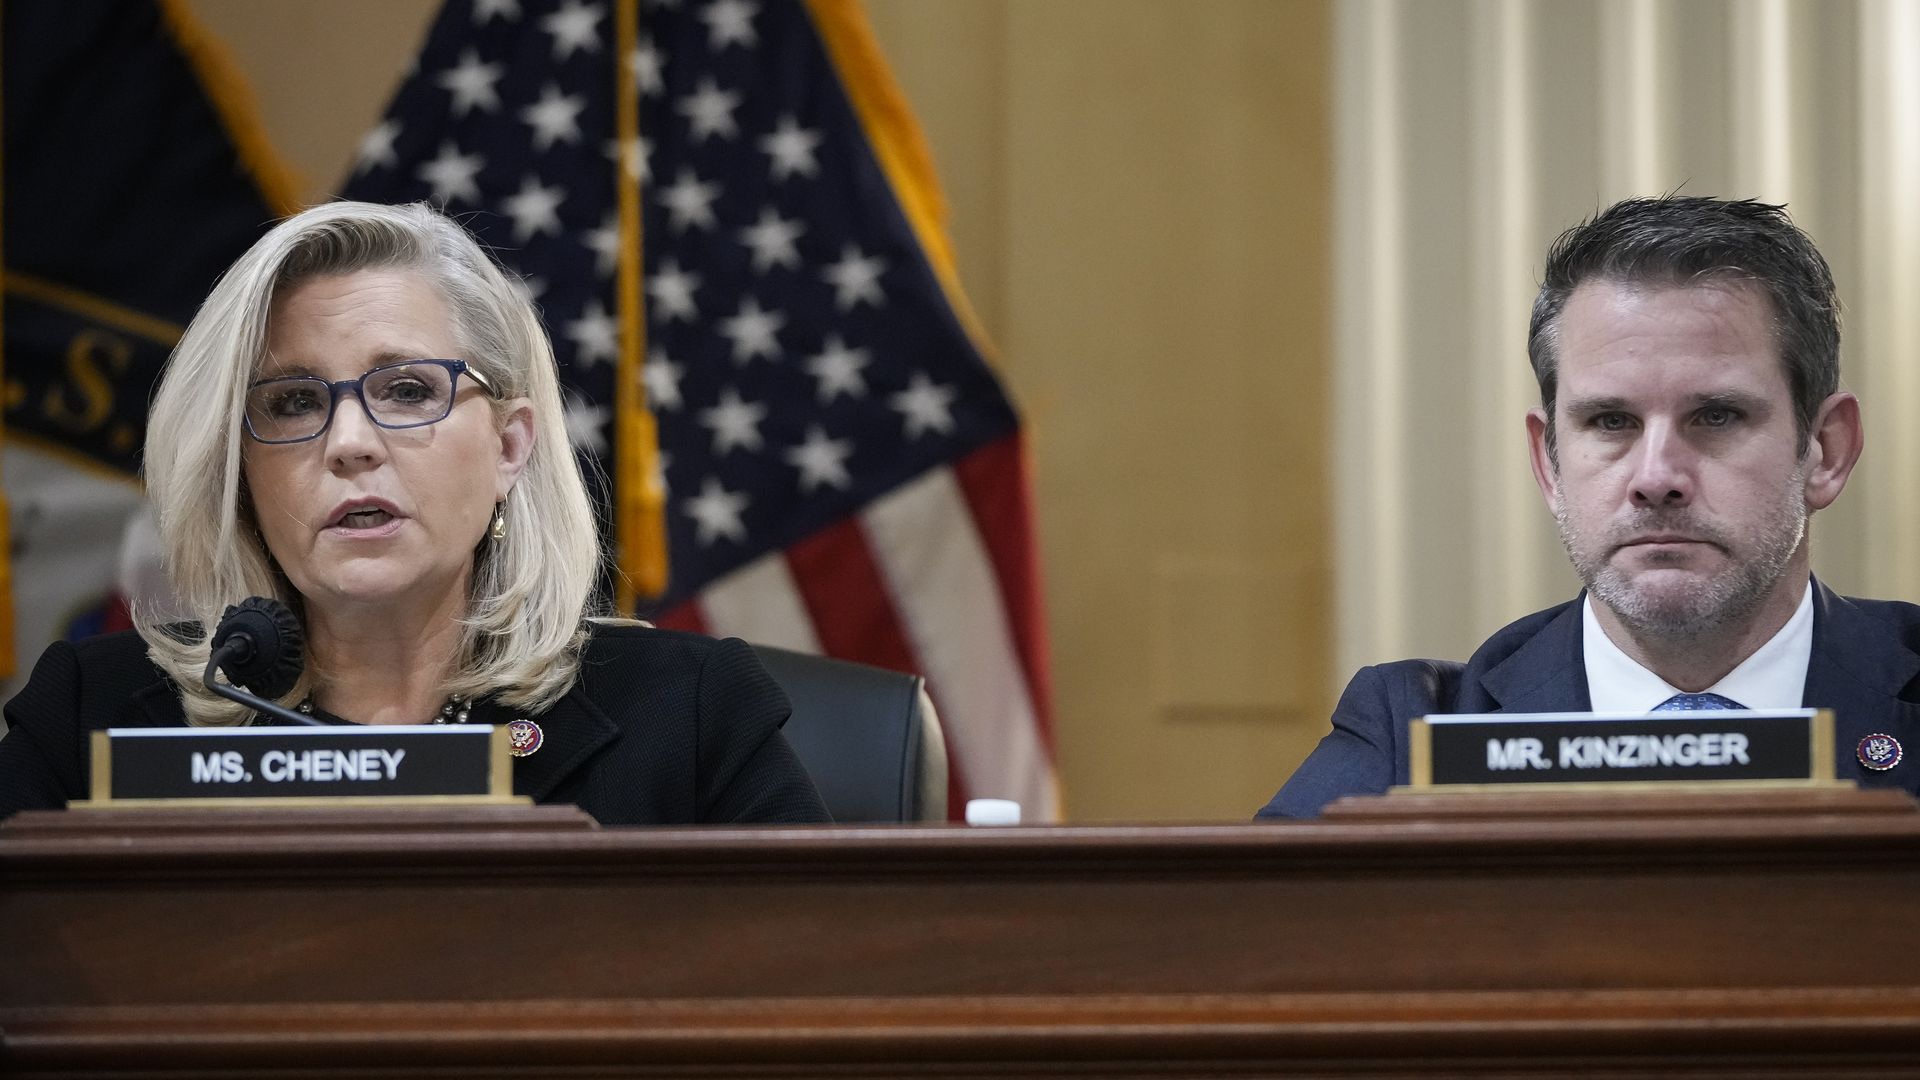 Reps. Liz Cheney and Adam Kinzinger during a committee meeting on Capitol Hill on December 1.